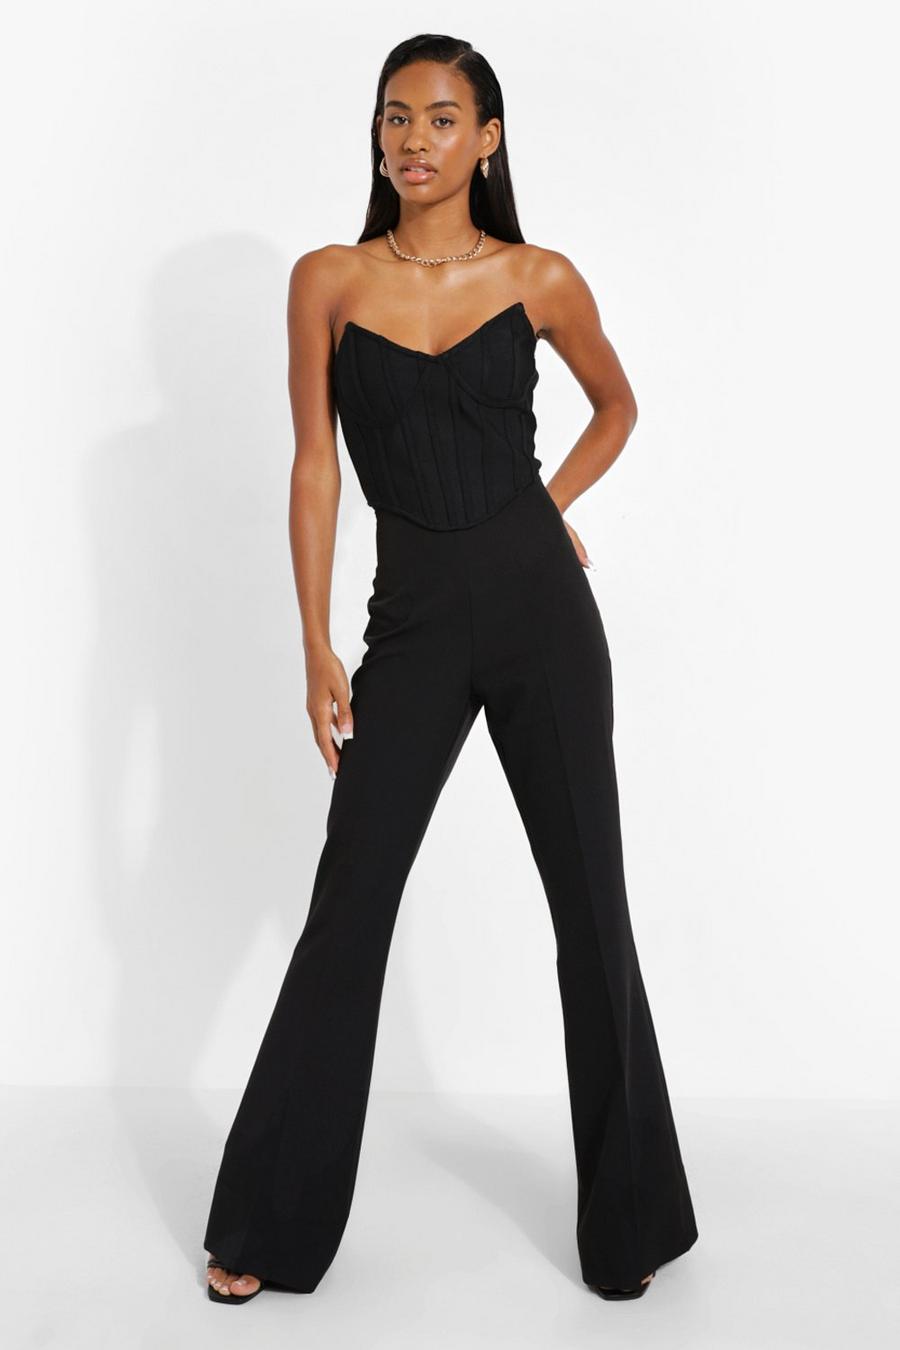 Black Fit & Flare Tailored Pants image number 1